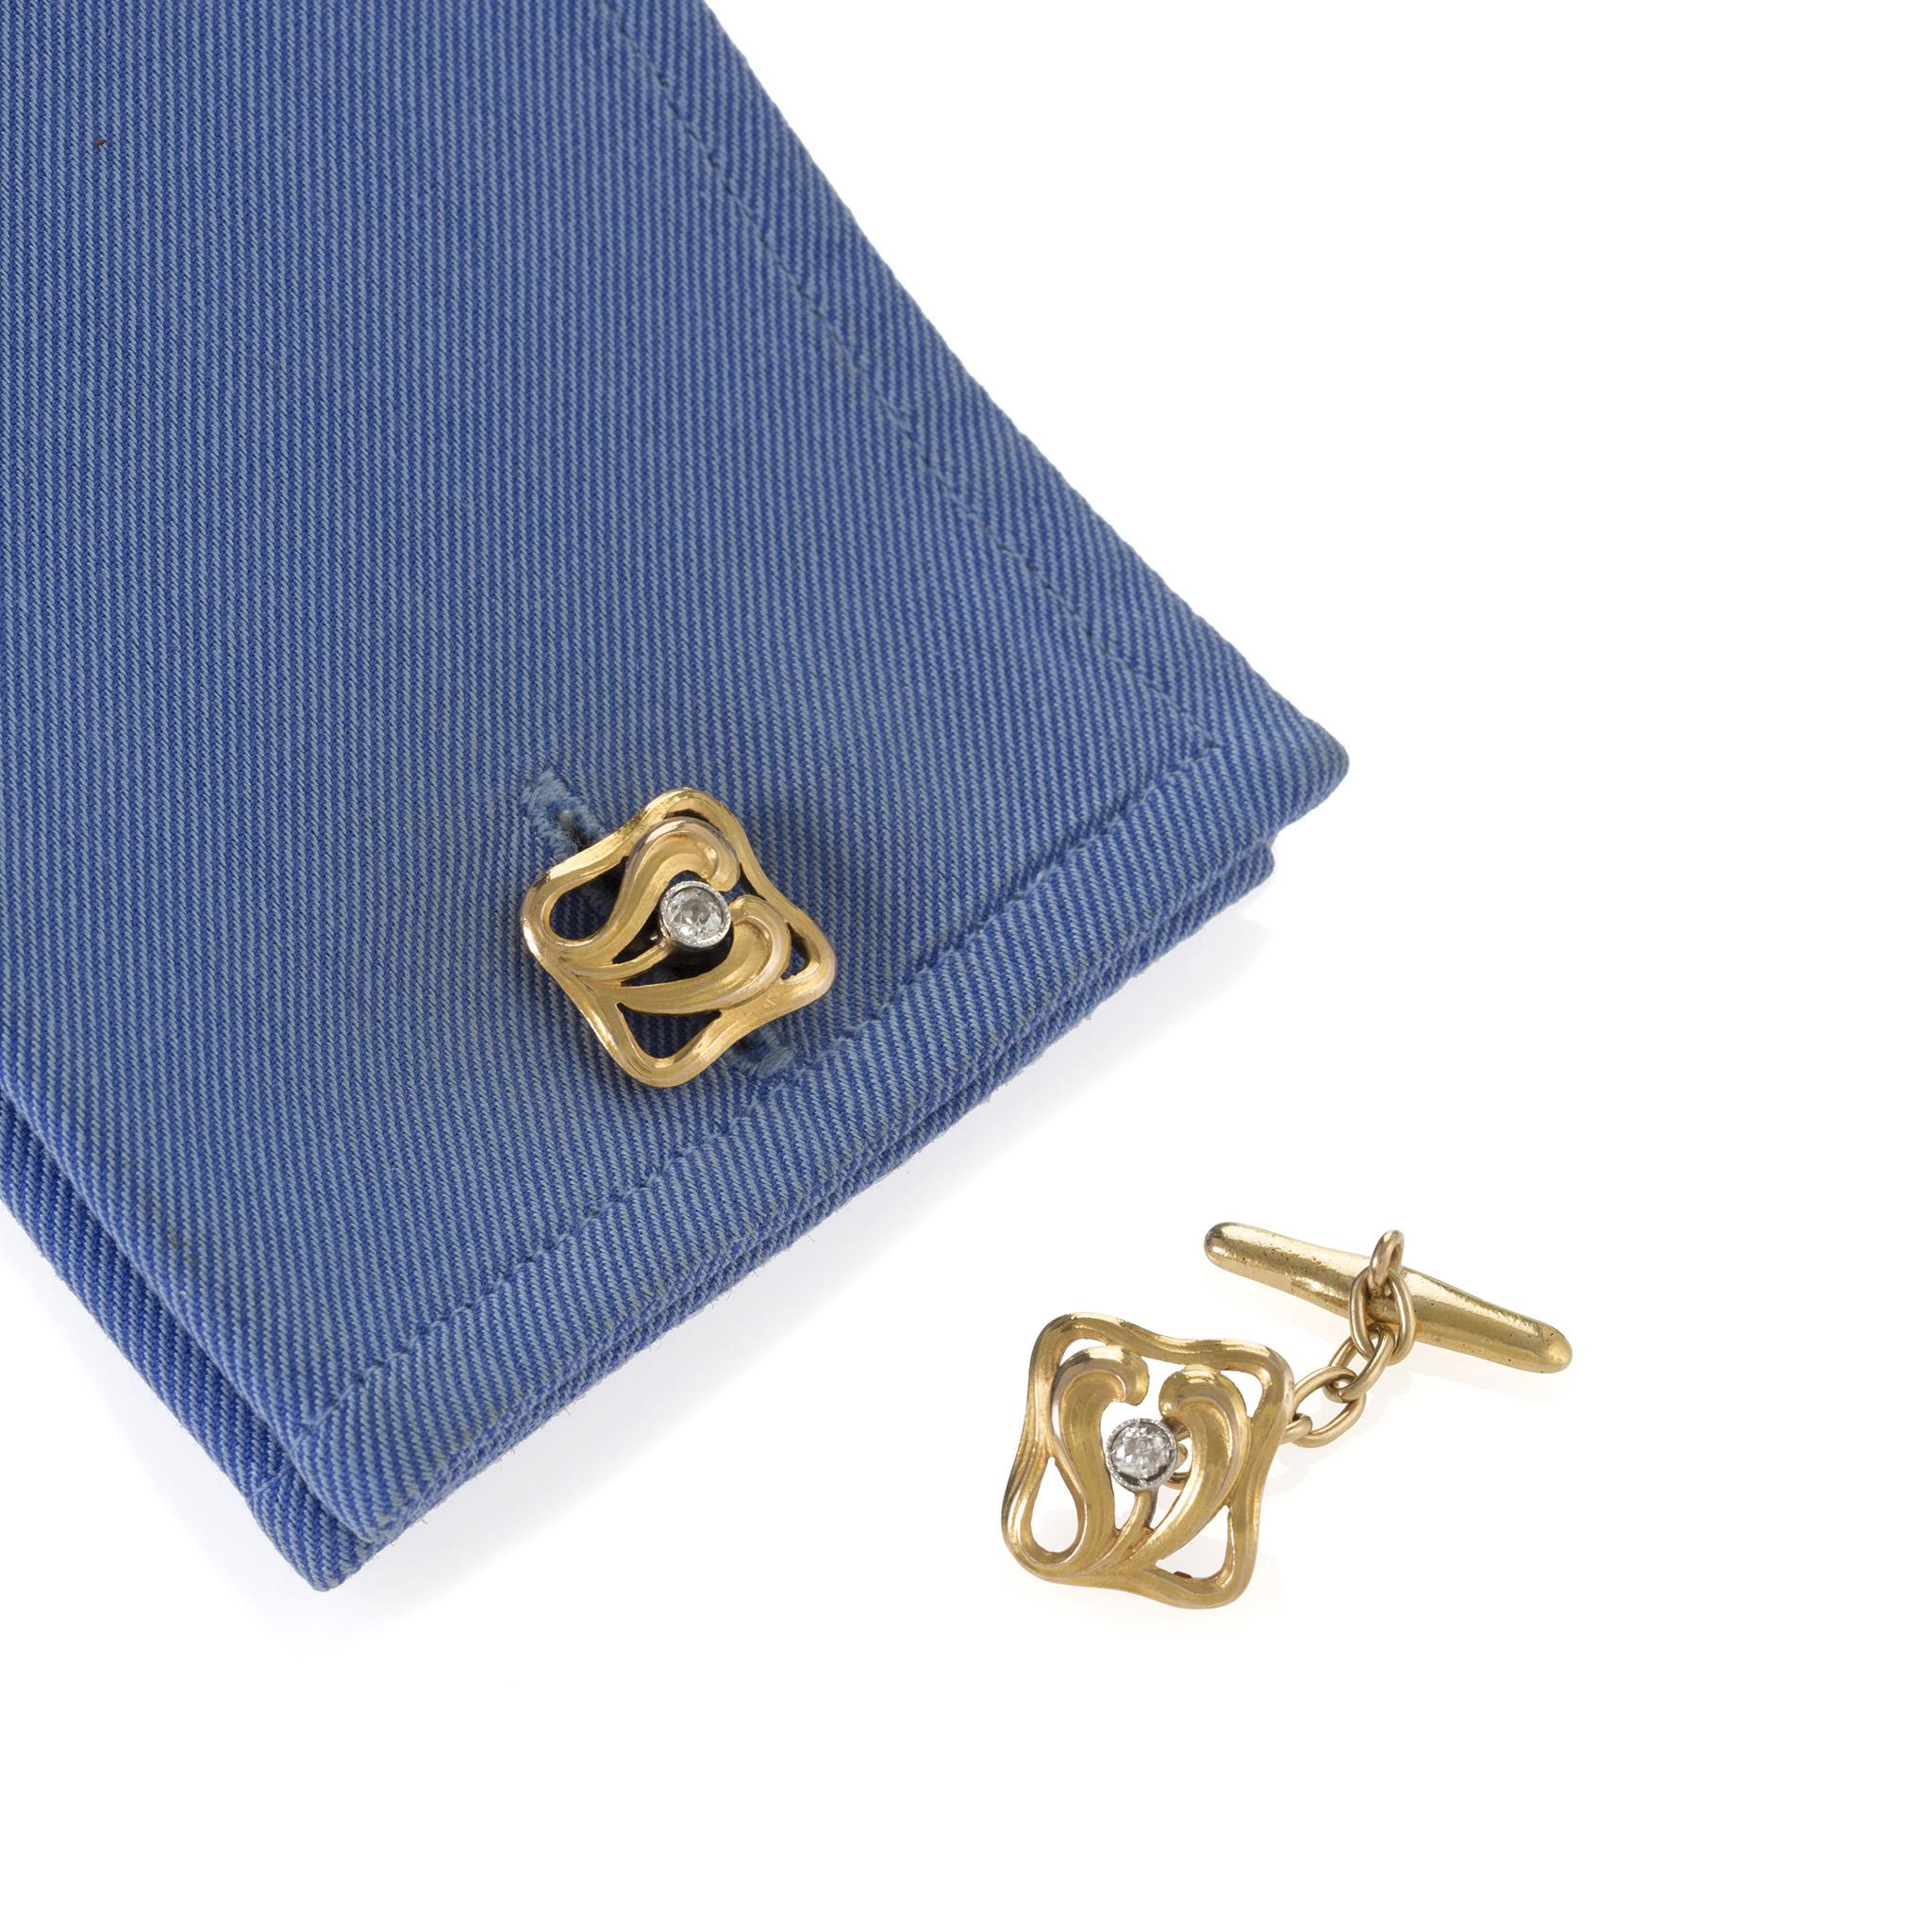 These French gold cuff links with diamond accents date from the Art Nouveau period. Each cuff link is designed as a chased and engraved sinuous vine enclosing two fronds, highlighted by a diamond bezel-set in platinum, and joined by trace link chain